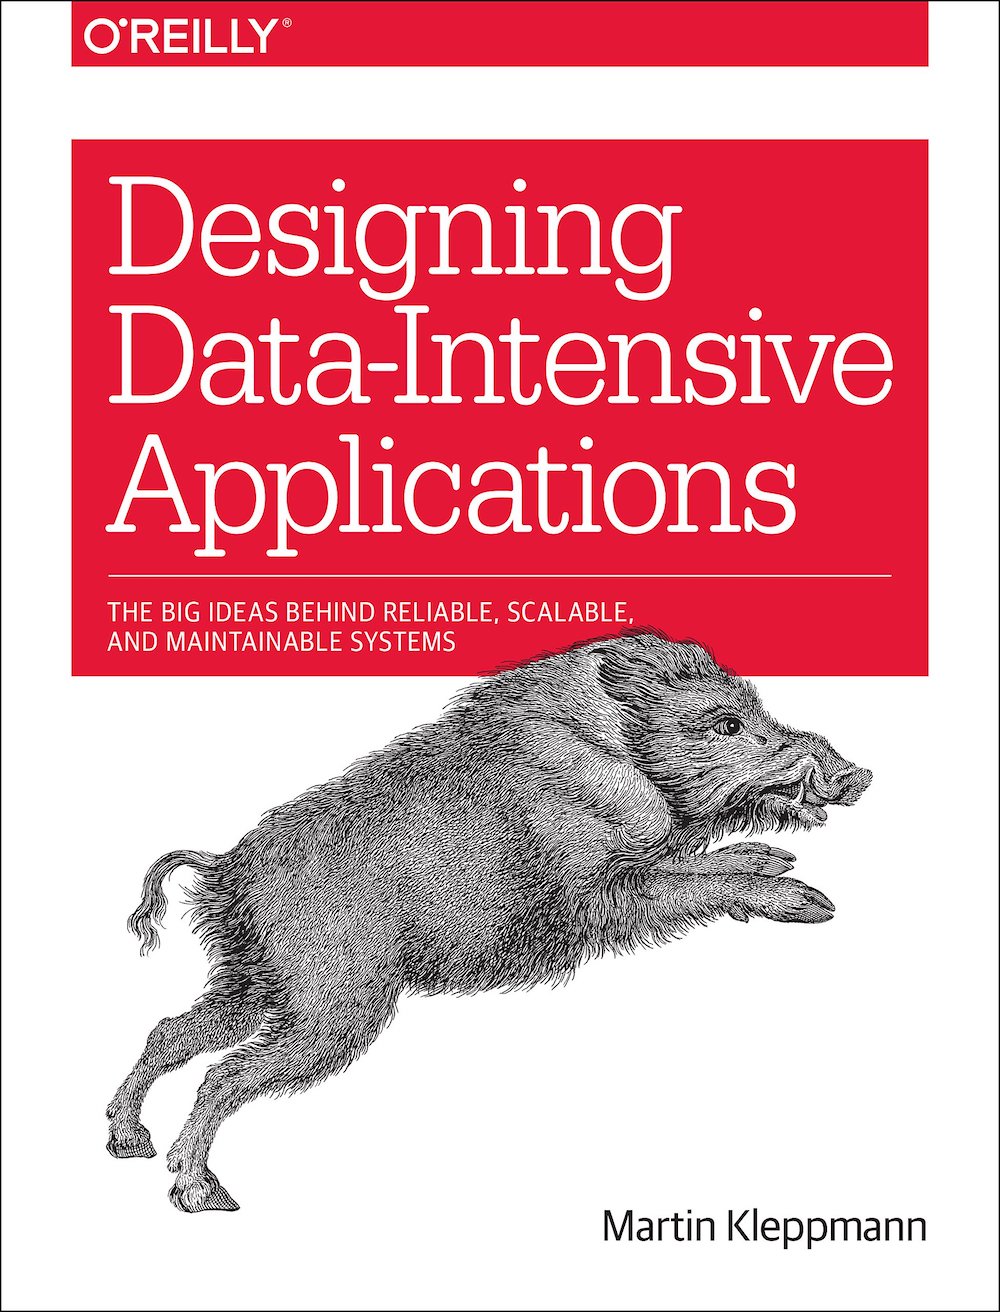 Designing Data-Intensive Applications - Chapter 12 - The Future of Data Systems